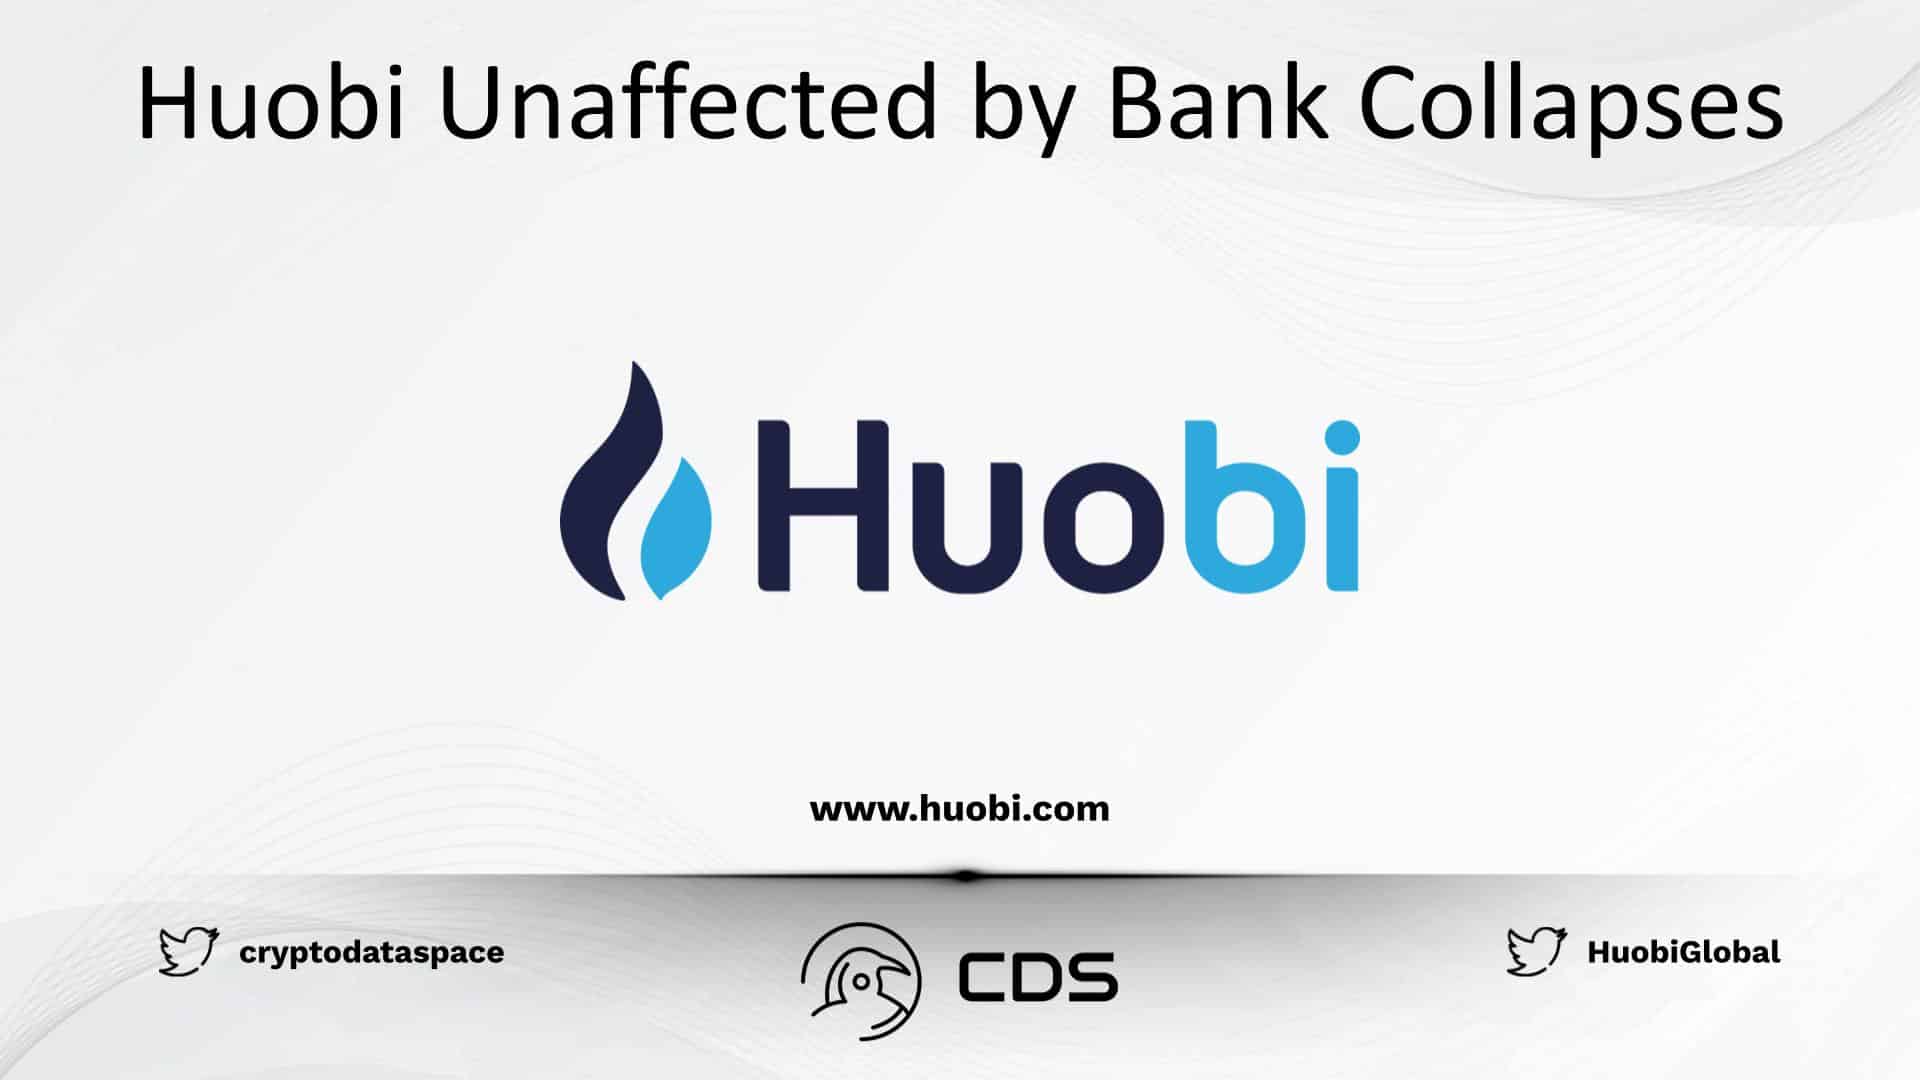 Huobi Unaffected by Bank Collapses